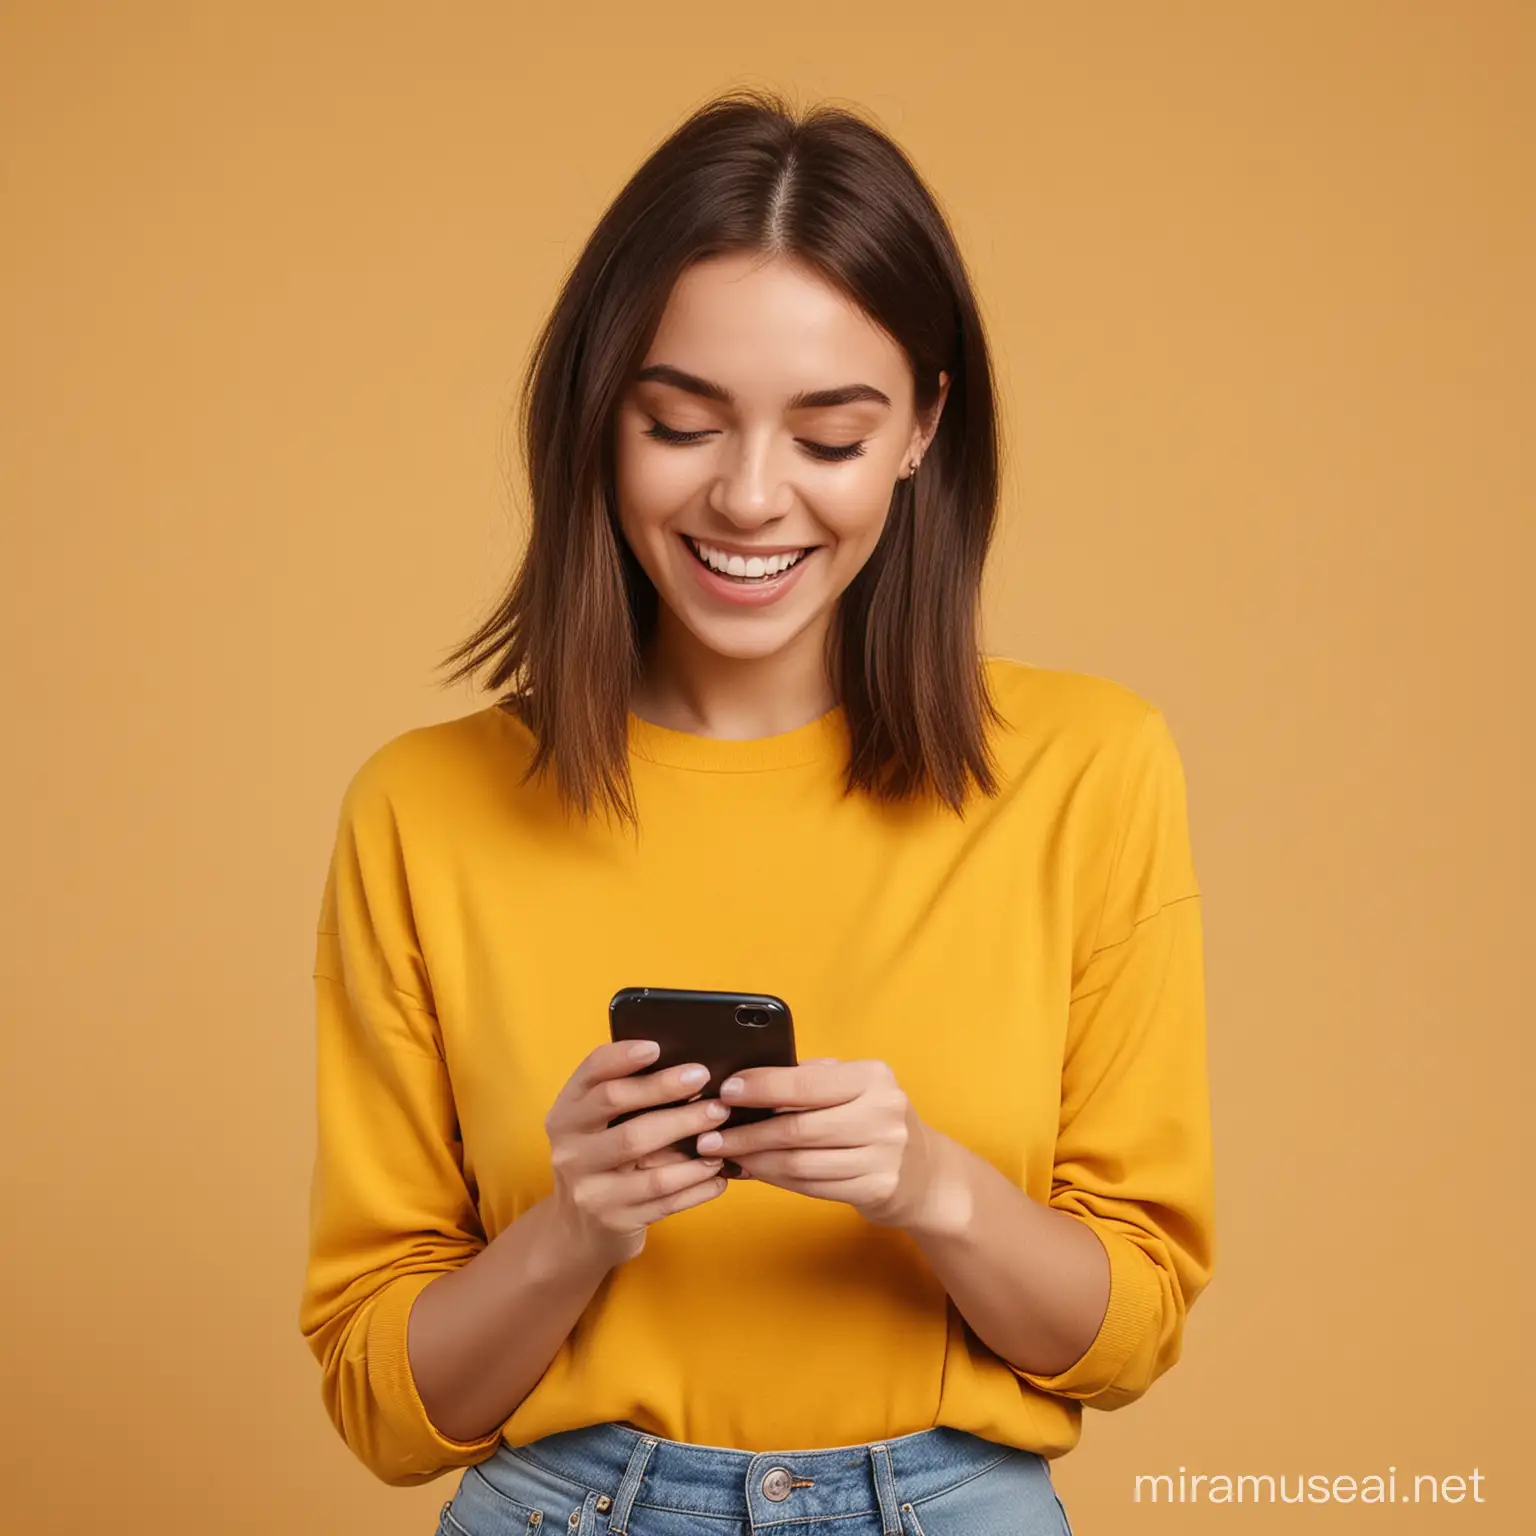 young happy female looking at phone, yellow background
